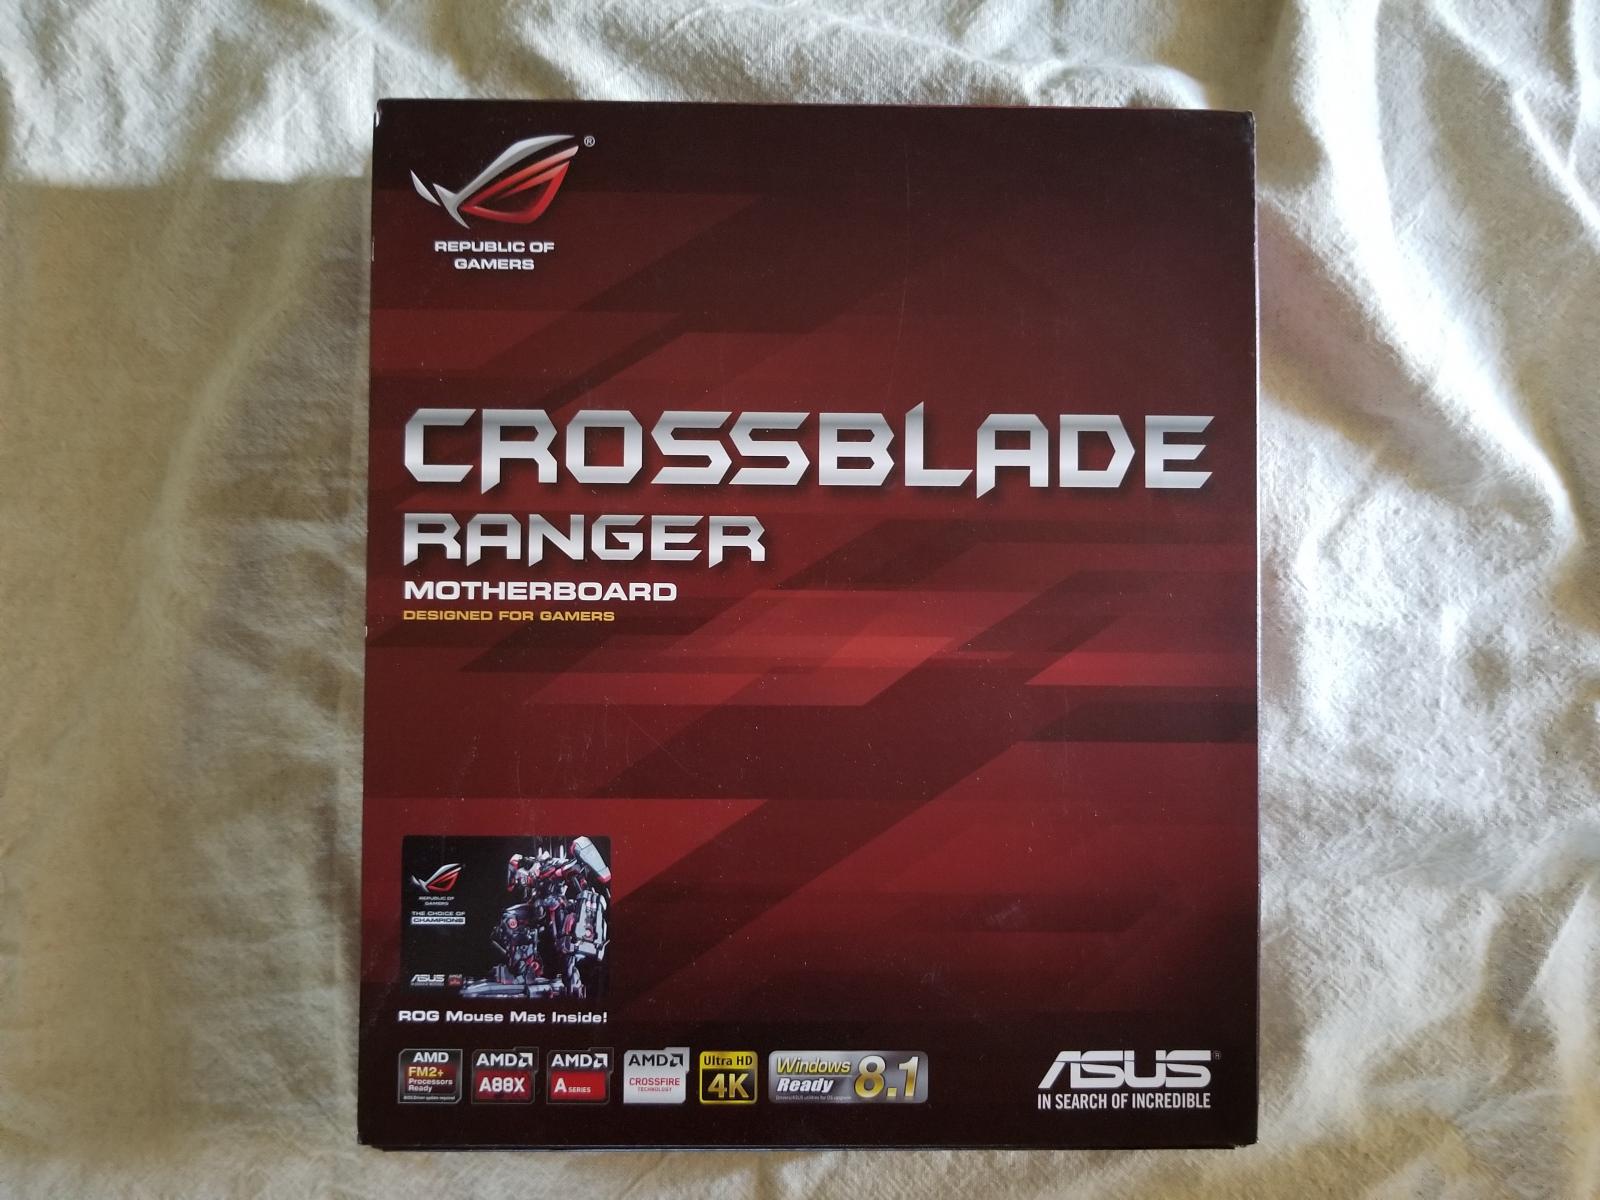 For sale AMD APU and ASUS mobo combo, great for HTPCs!